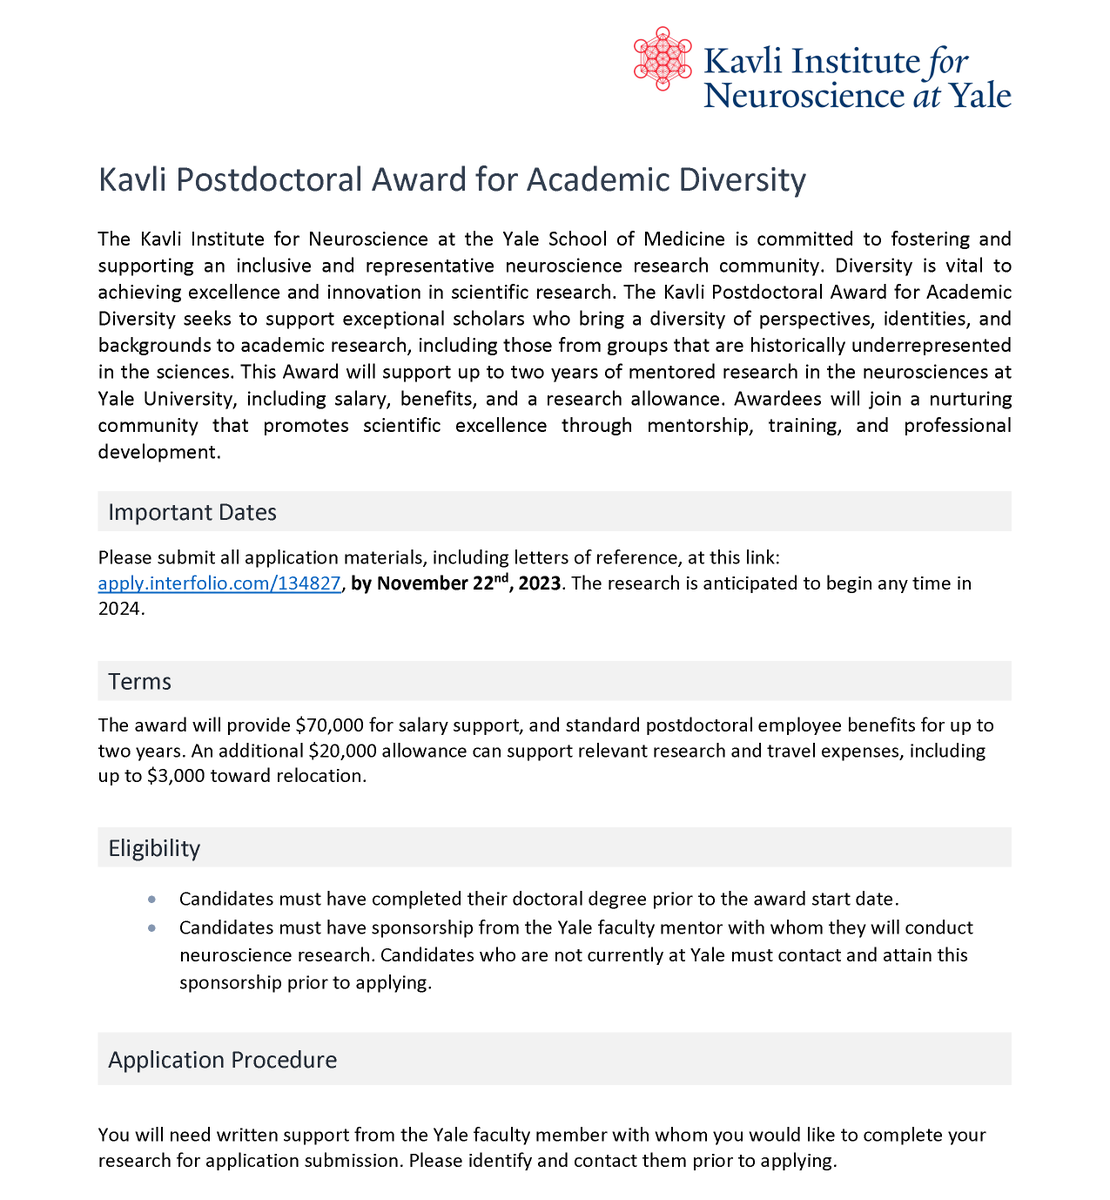 📢Applications are open for the Kavli Postdoctoral Award for Academic Diversity. This 2-year award supports exceptional scholars bringing a diversity of perspectives, identities & backgrounds to academic research. Open to folks new to Yale or already here! apply.interfolio.com/134827